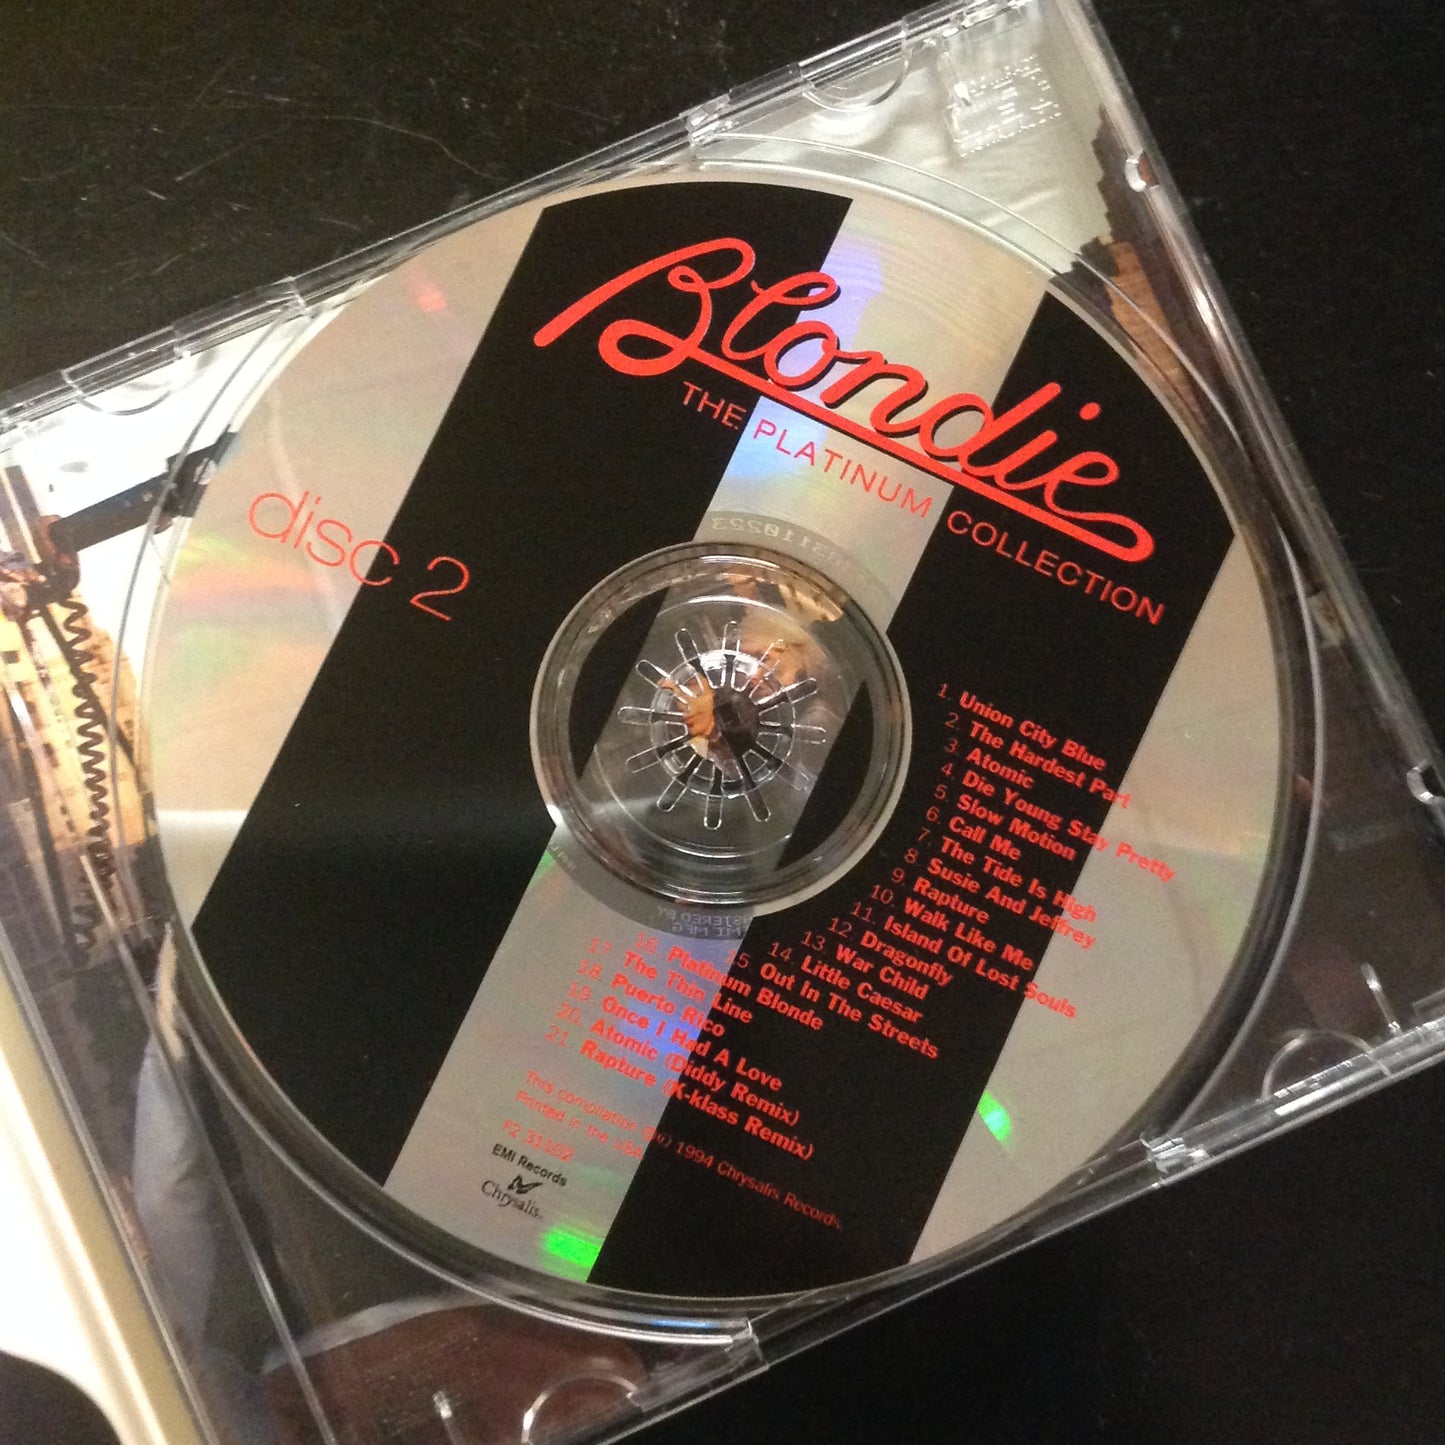 CD 2 Disc Set Blondie The Platinum Collection Chrysalis – 7243 8 31100 2 5 Compilation Hits